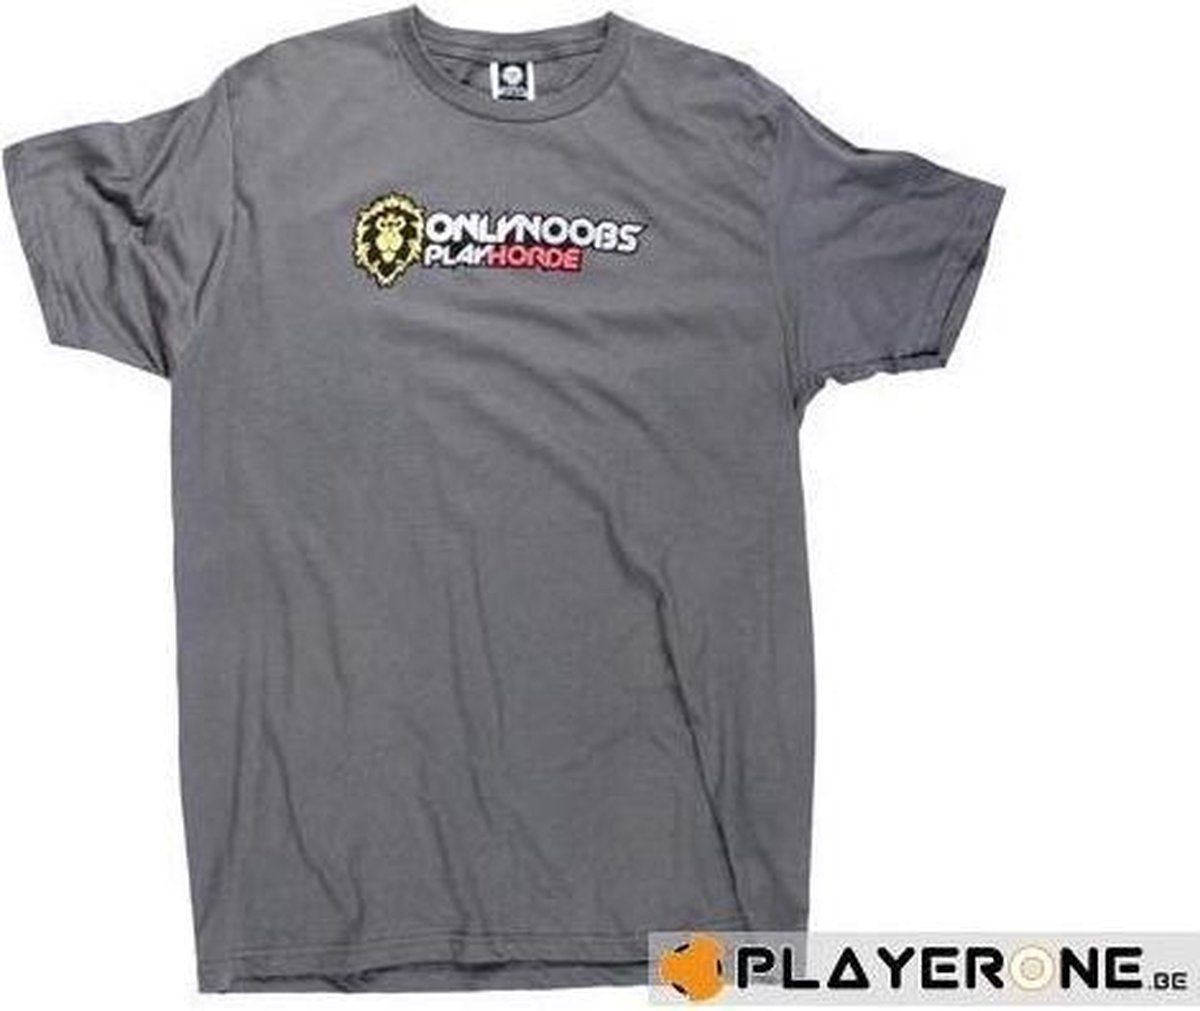 Merchandising WORLD OF WARCRAFT - T-Shirt Only noobs play Horde (S)